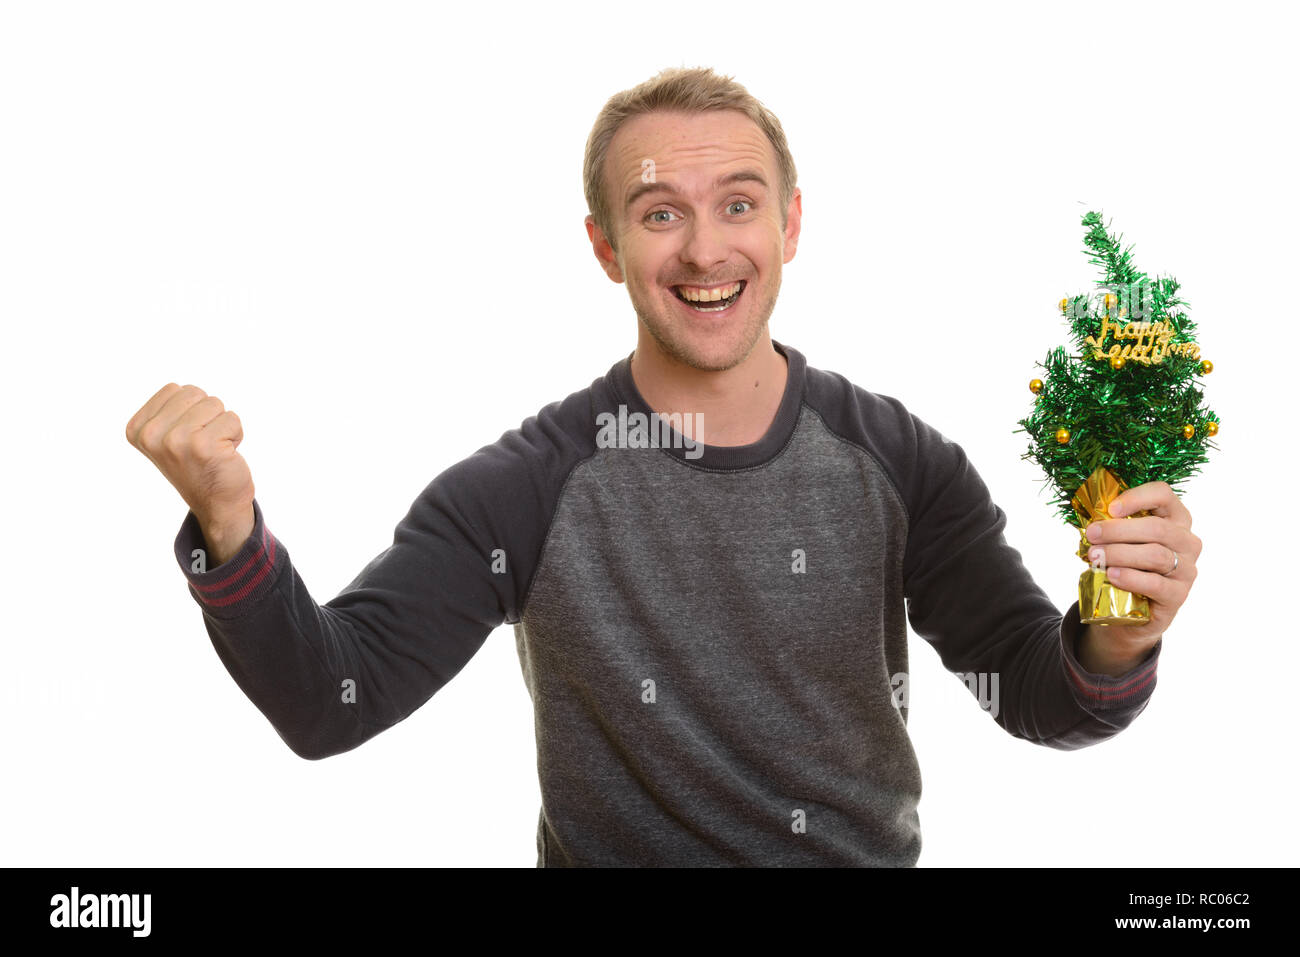 Happy Caucasian man holding Happy New Year tree looking excited Stock Photo